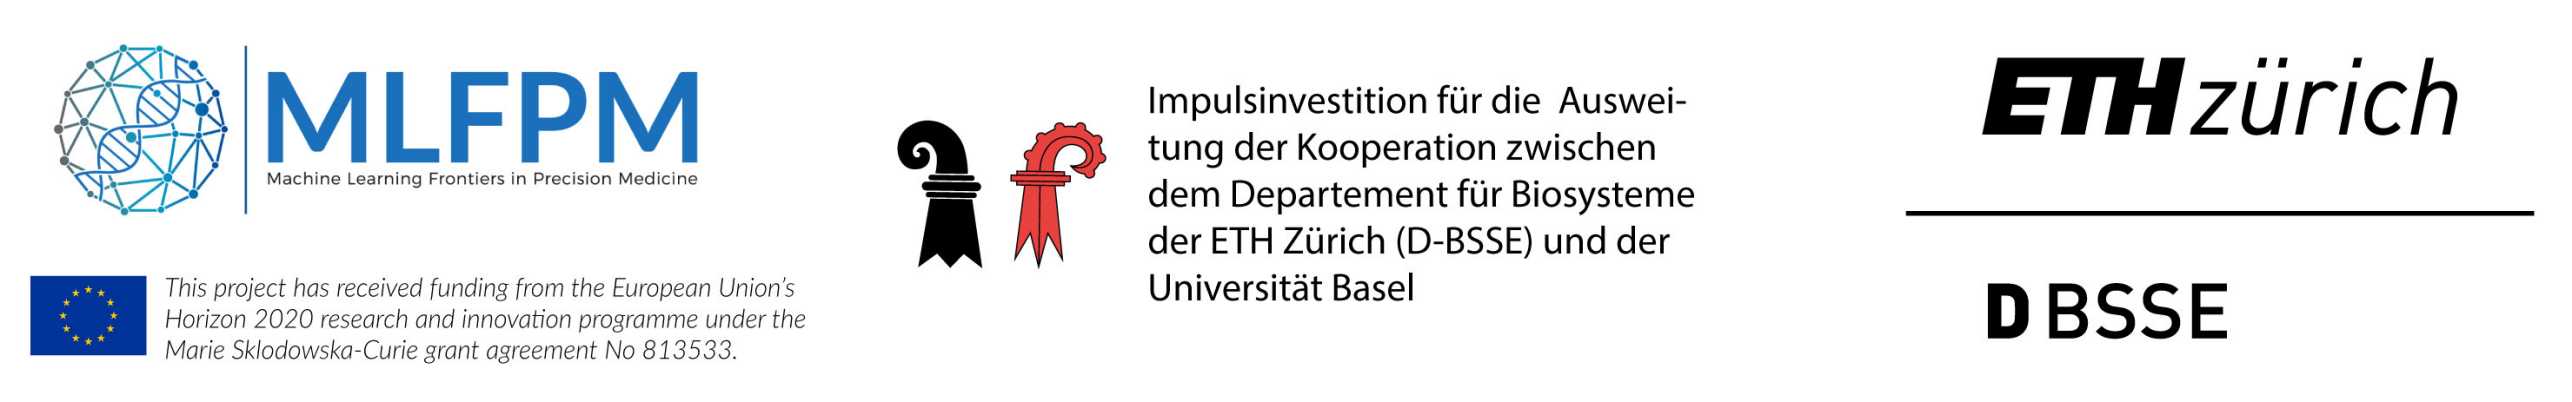 Logos of MLFPM, Cantons Basel, ETH Zurich and D-BSSE